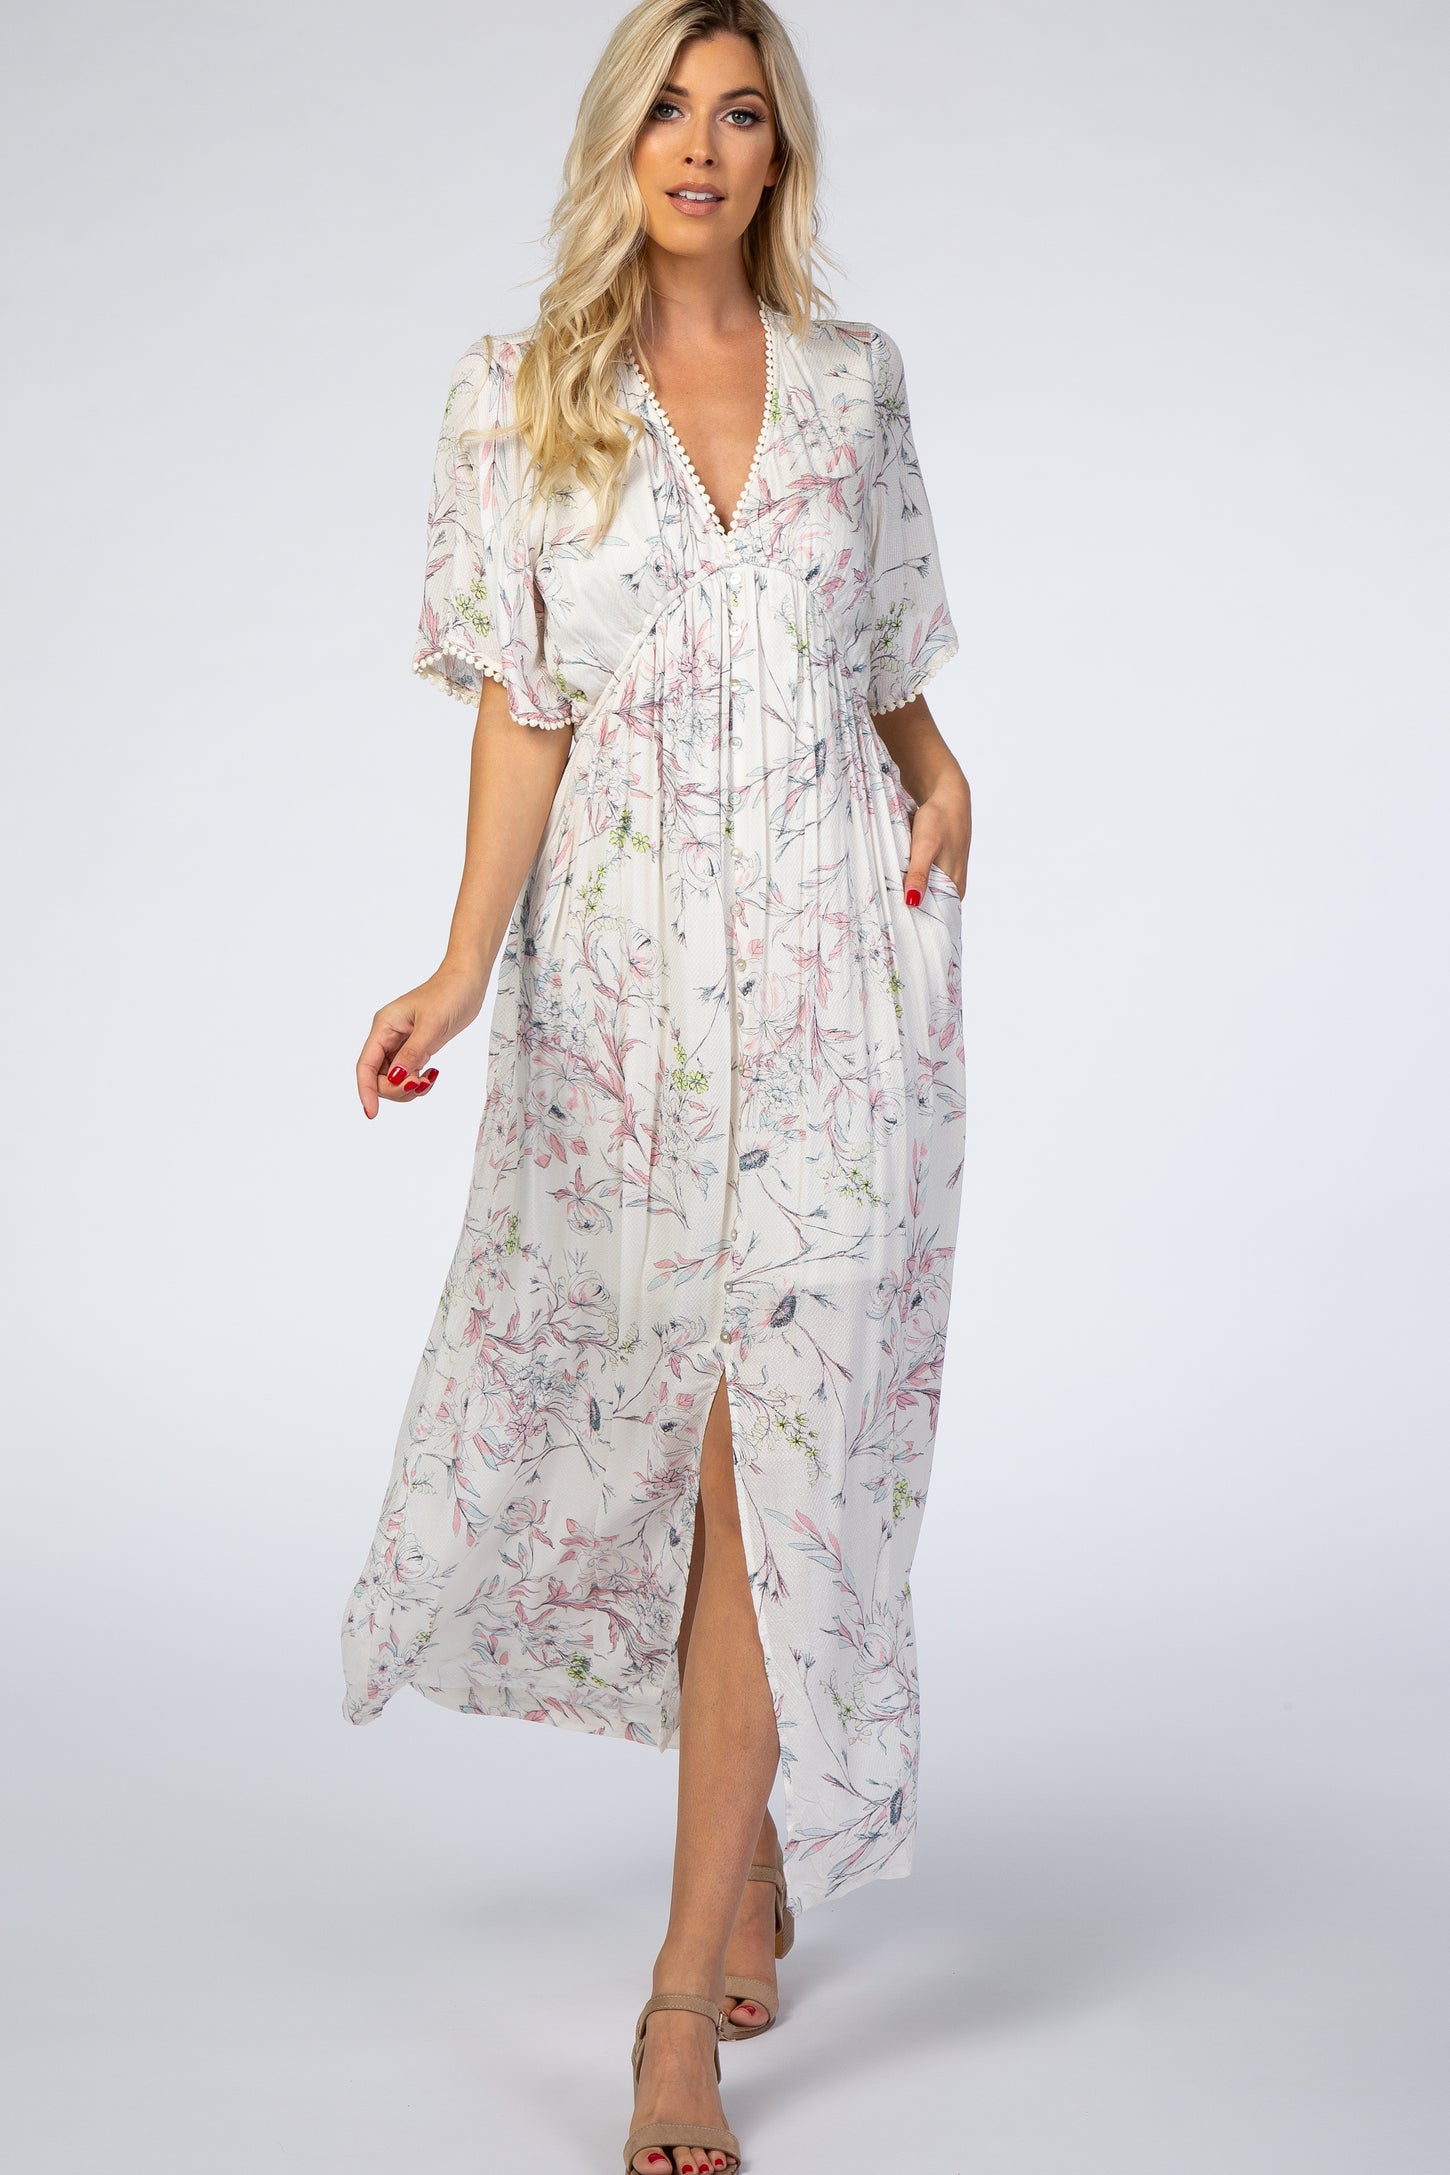 Ivory Floral Button Front Maternity Maxi Dress – PinkBlush